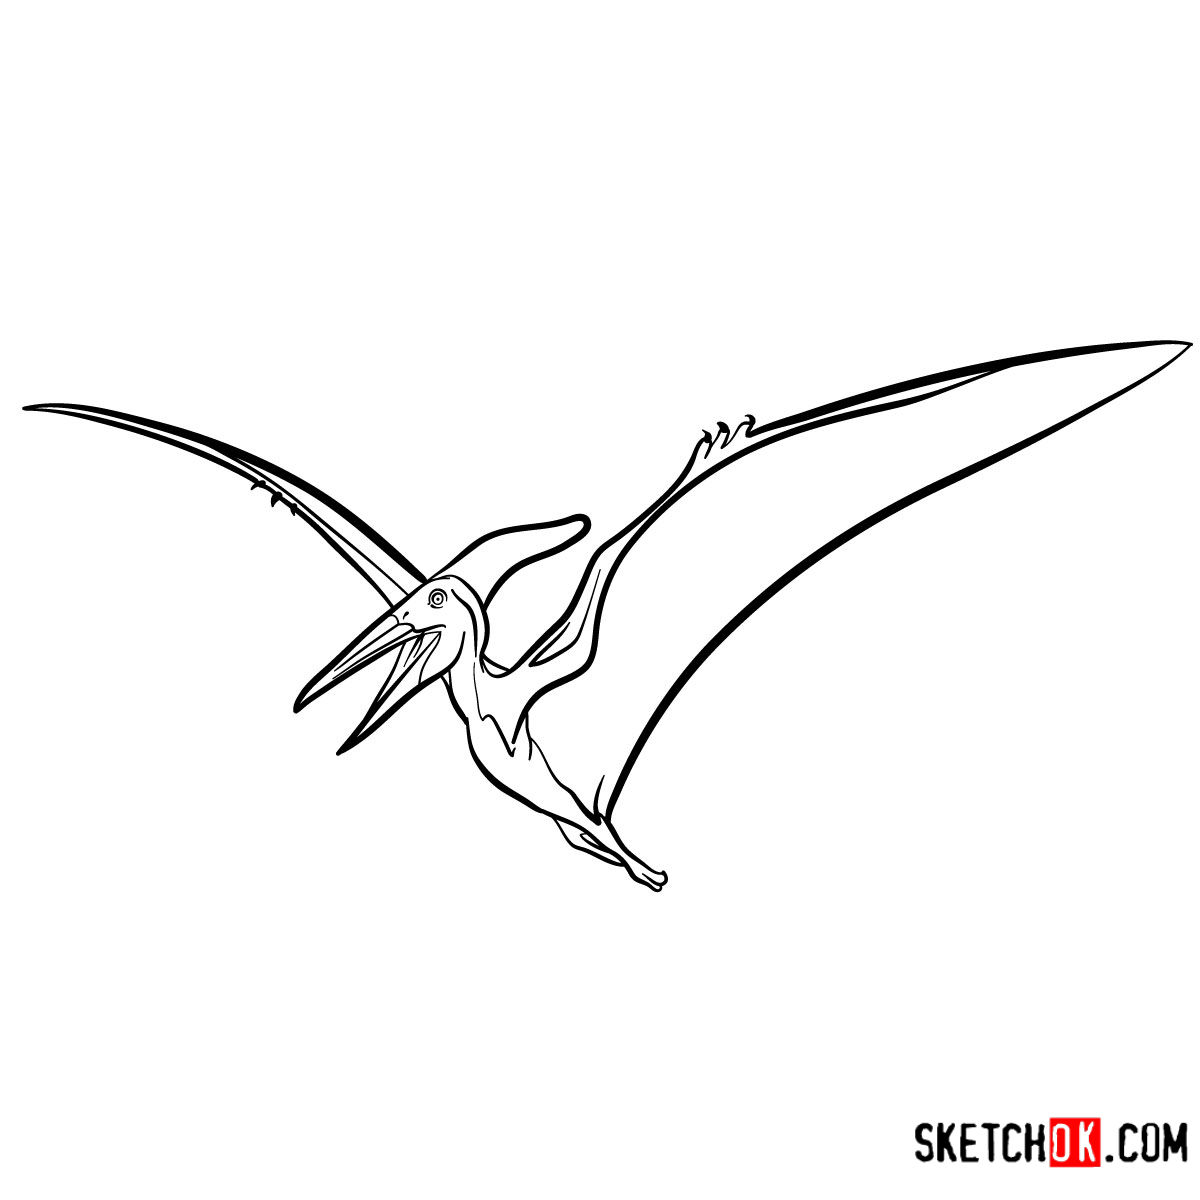 How to draw a Pteranodon